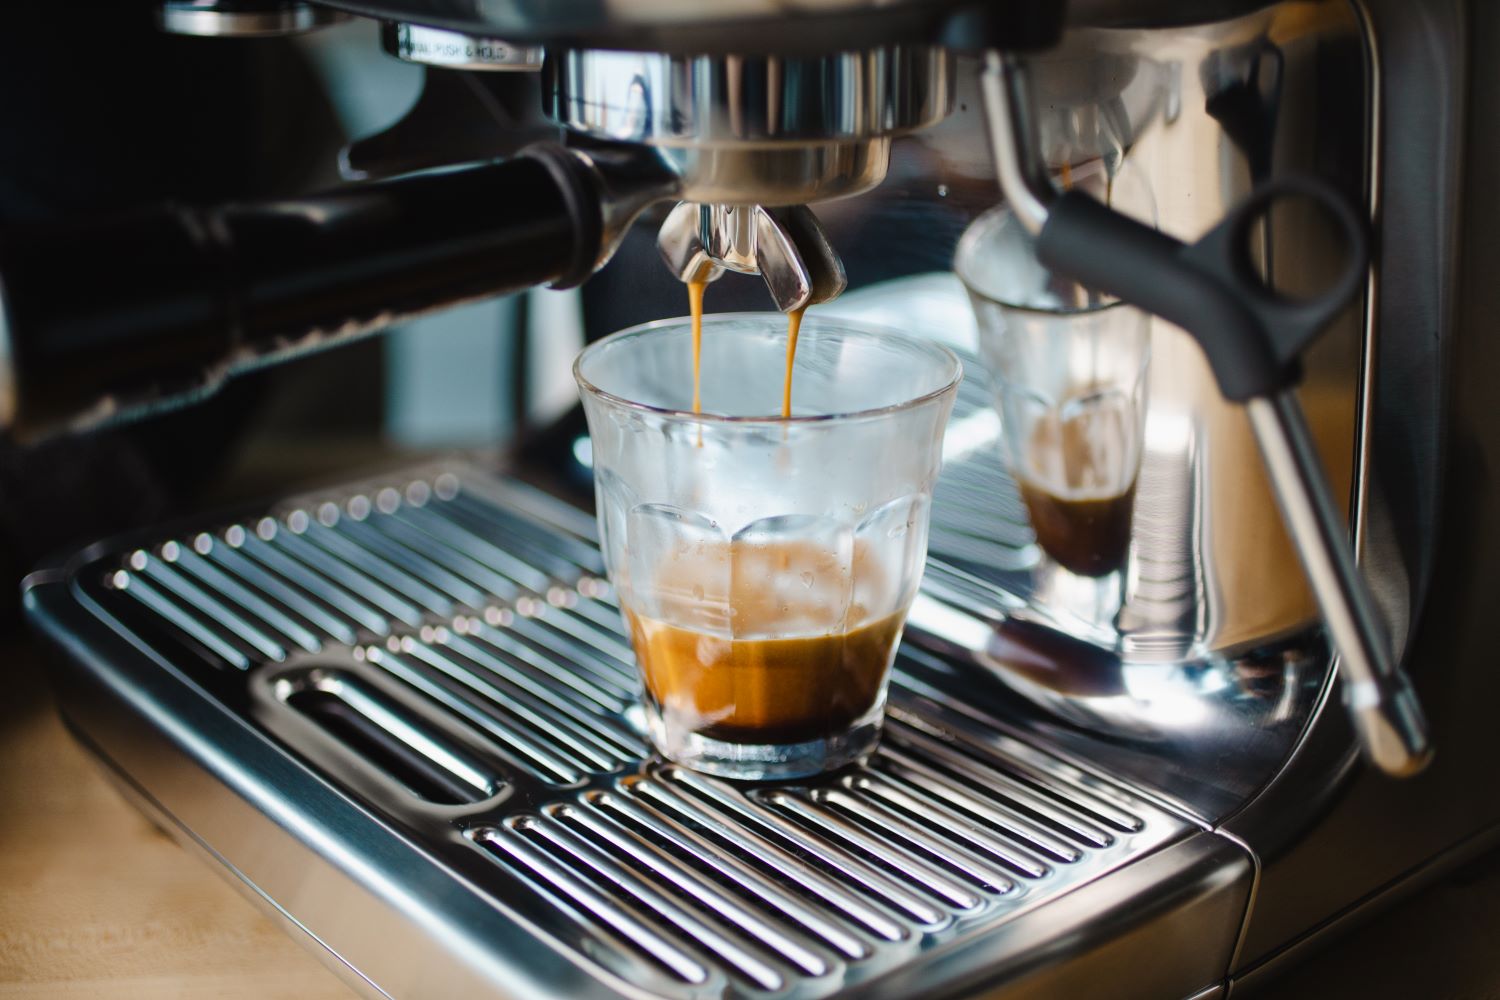 How to Use and Care for Your Espresso Machine